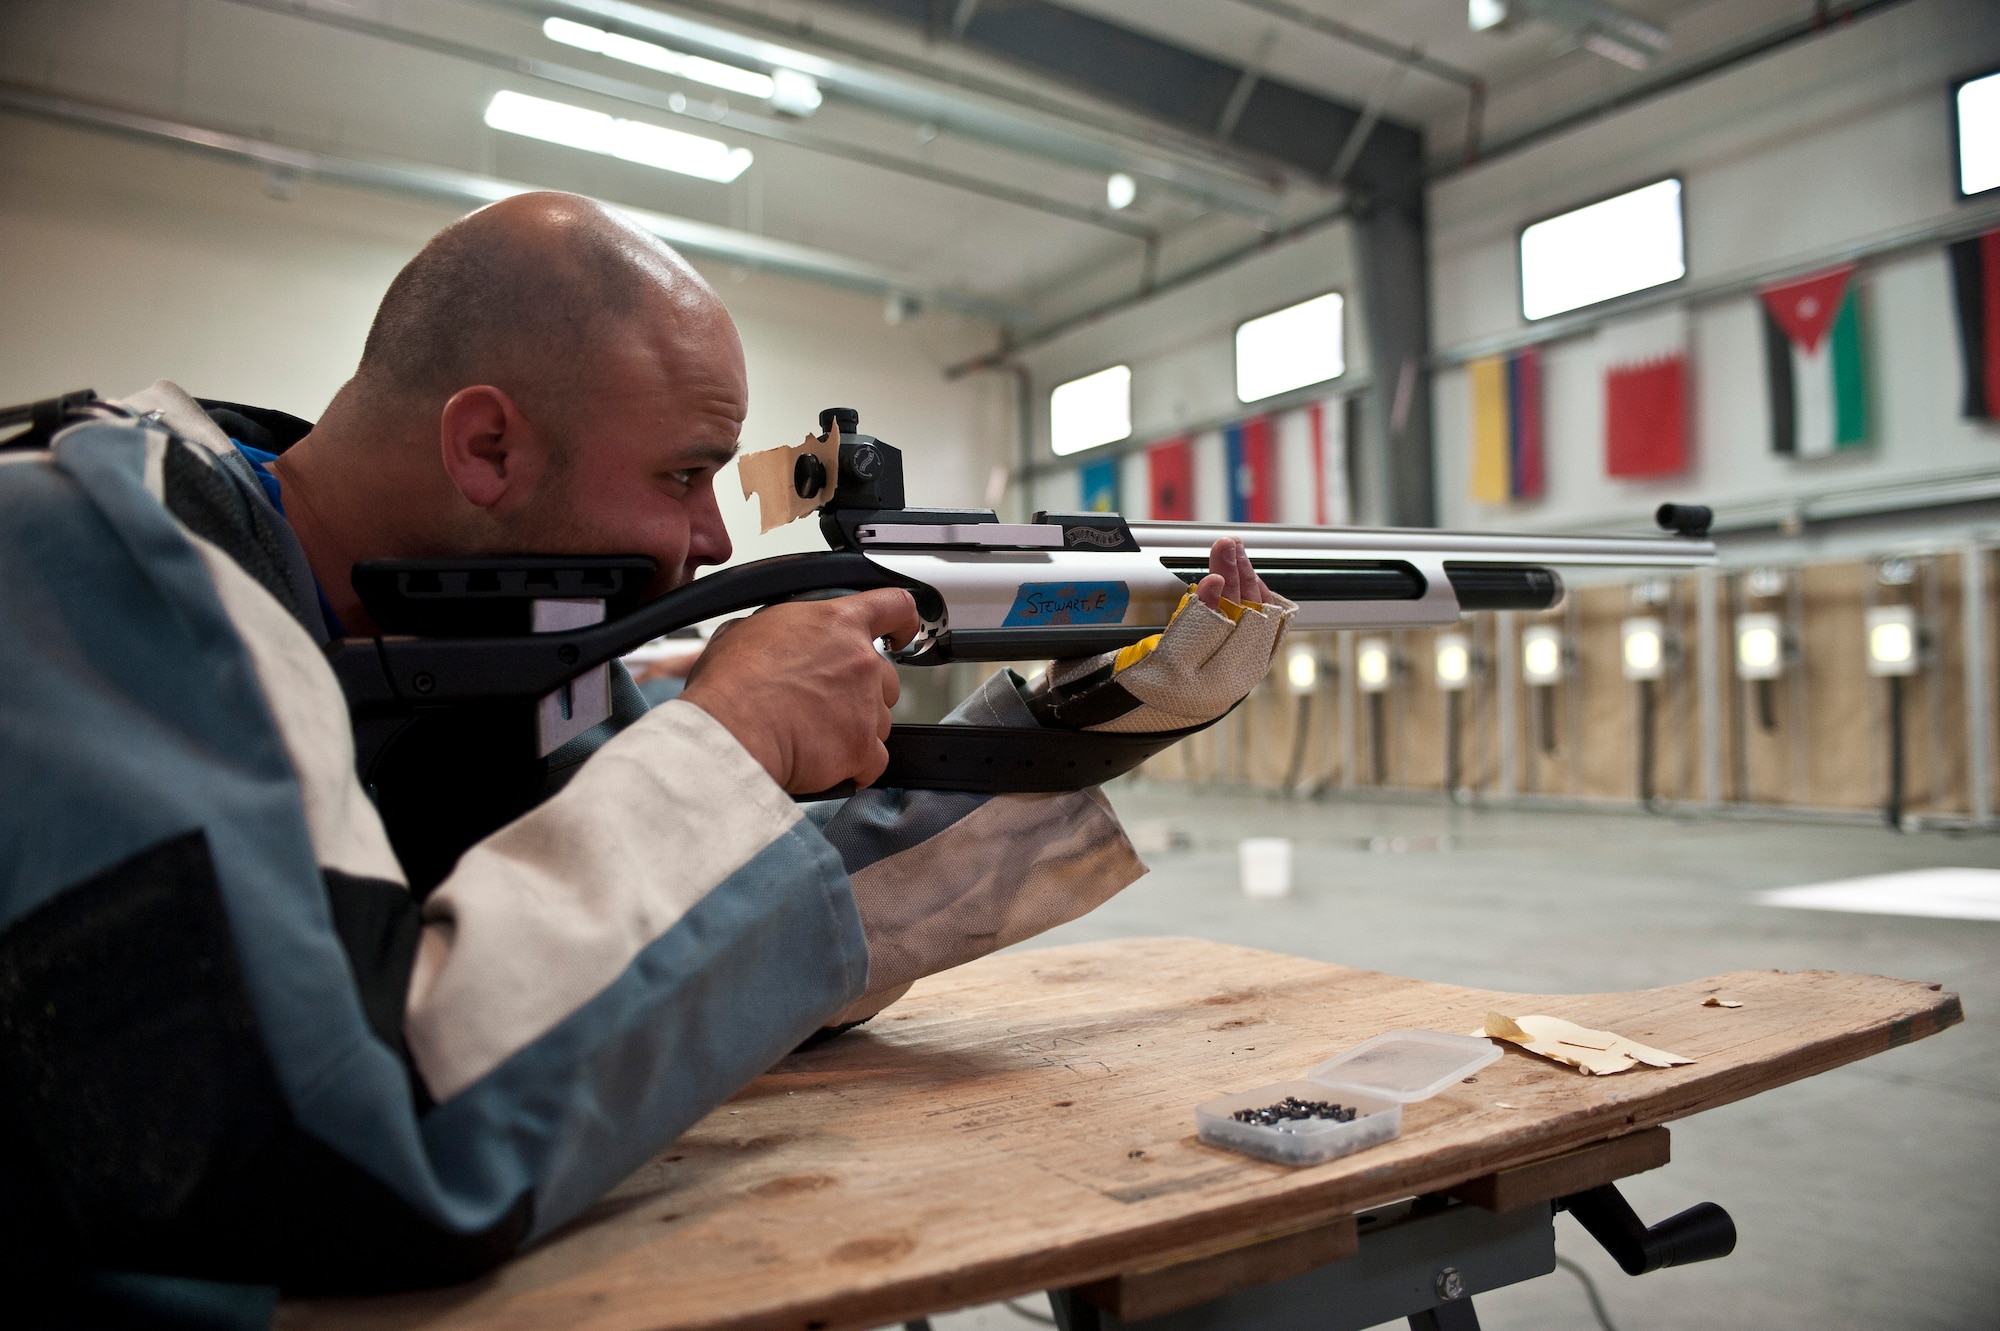 Edward Newbern, 2015 U.S. Air Force Trials participant, aims at a target during the rifle shooting preliminary competition at Nellis Air Force Base, Nev., March 3, 2015. Participants in the trials will compete in wheelchair basketball, wheelchair rugby, sitting volleyball, swimming, track and field, air pistol and rifle shooting, archery and cycling. (U.S. Air Force photo by Staff Sgt. Siuta B. Ika)